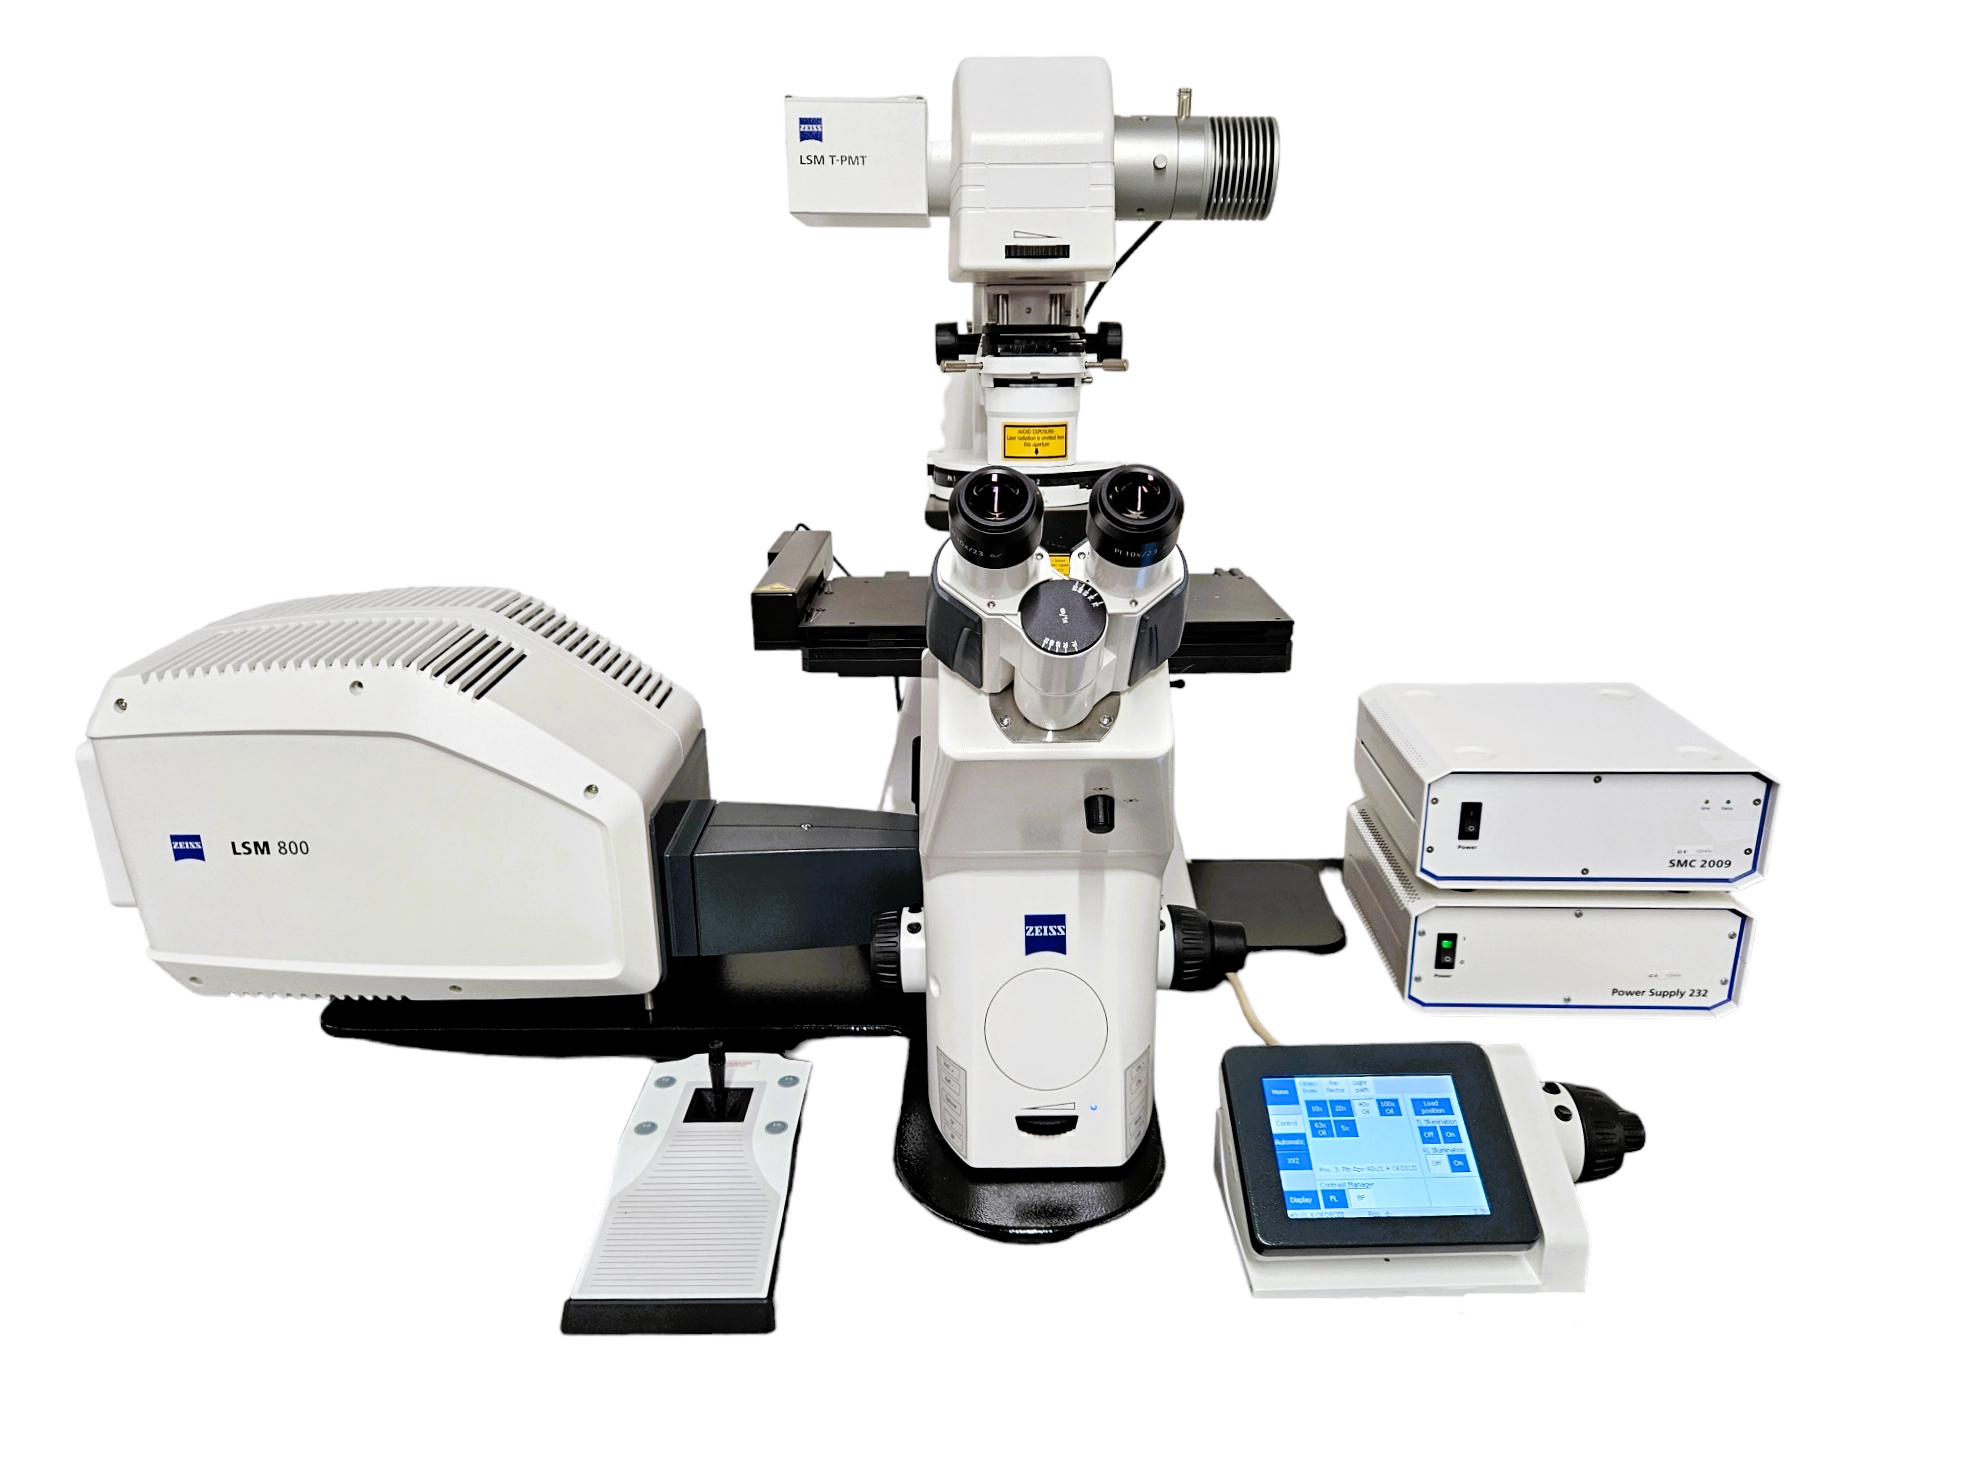 Zeiss LSM 800 Confocal w/ Axio Observer 7 Inverted Phase Contrast Motorized Fluorescence Trinocular w/ Definite Focus Microscope